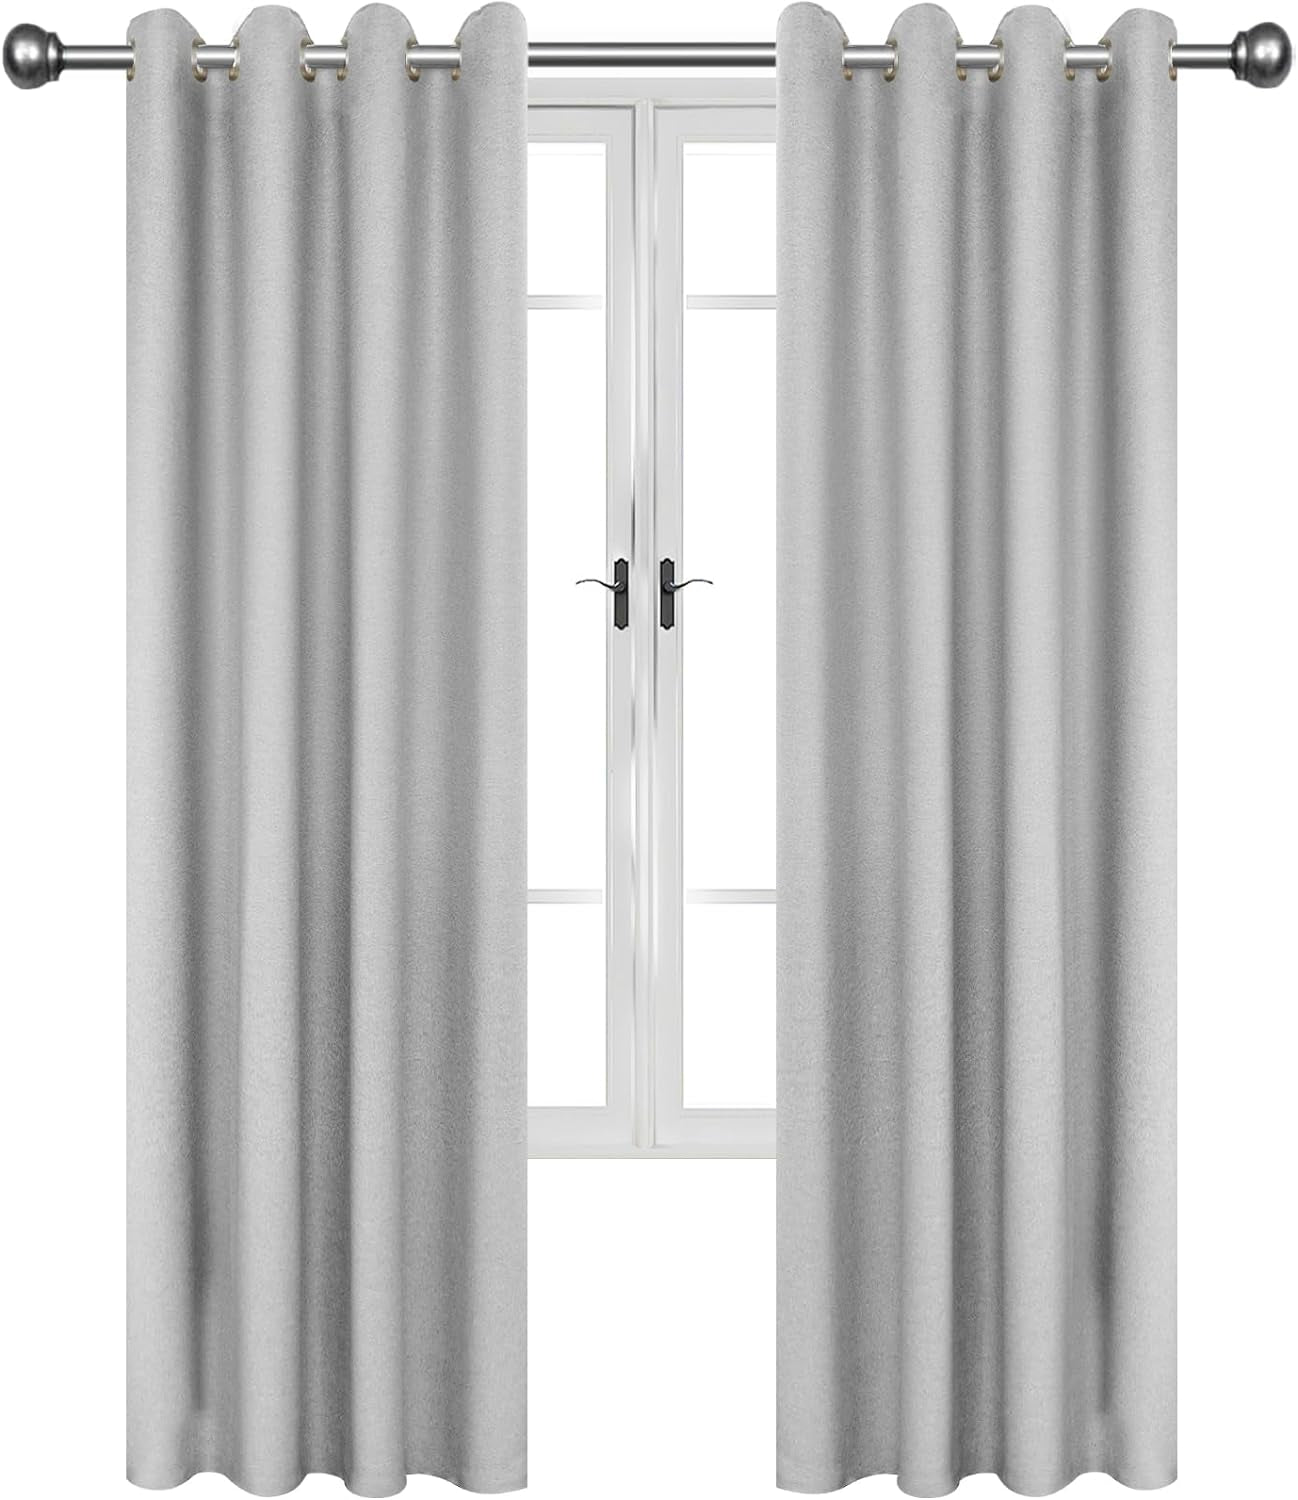 JIVINER Blackout Curtains 84 Inches Long Soundproof Thermal Insulated Curtains/Drapes/Panels for Kid'S Room (Baby Pink, W42 X L84,2 Panels)  JWN E-Commerce Linen Light Grey W42 X L84 ,2 Panels 